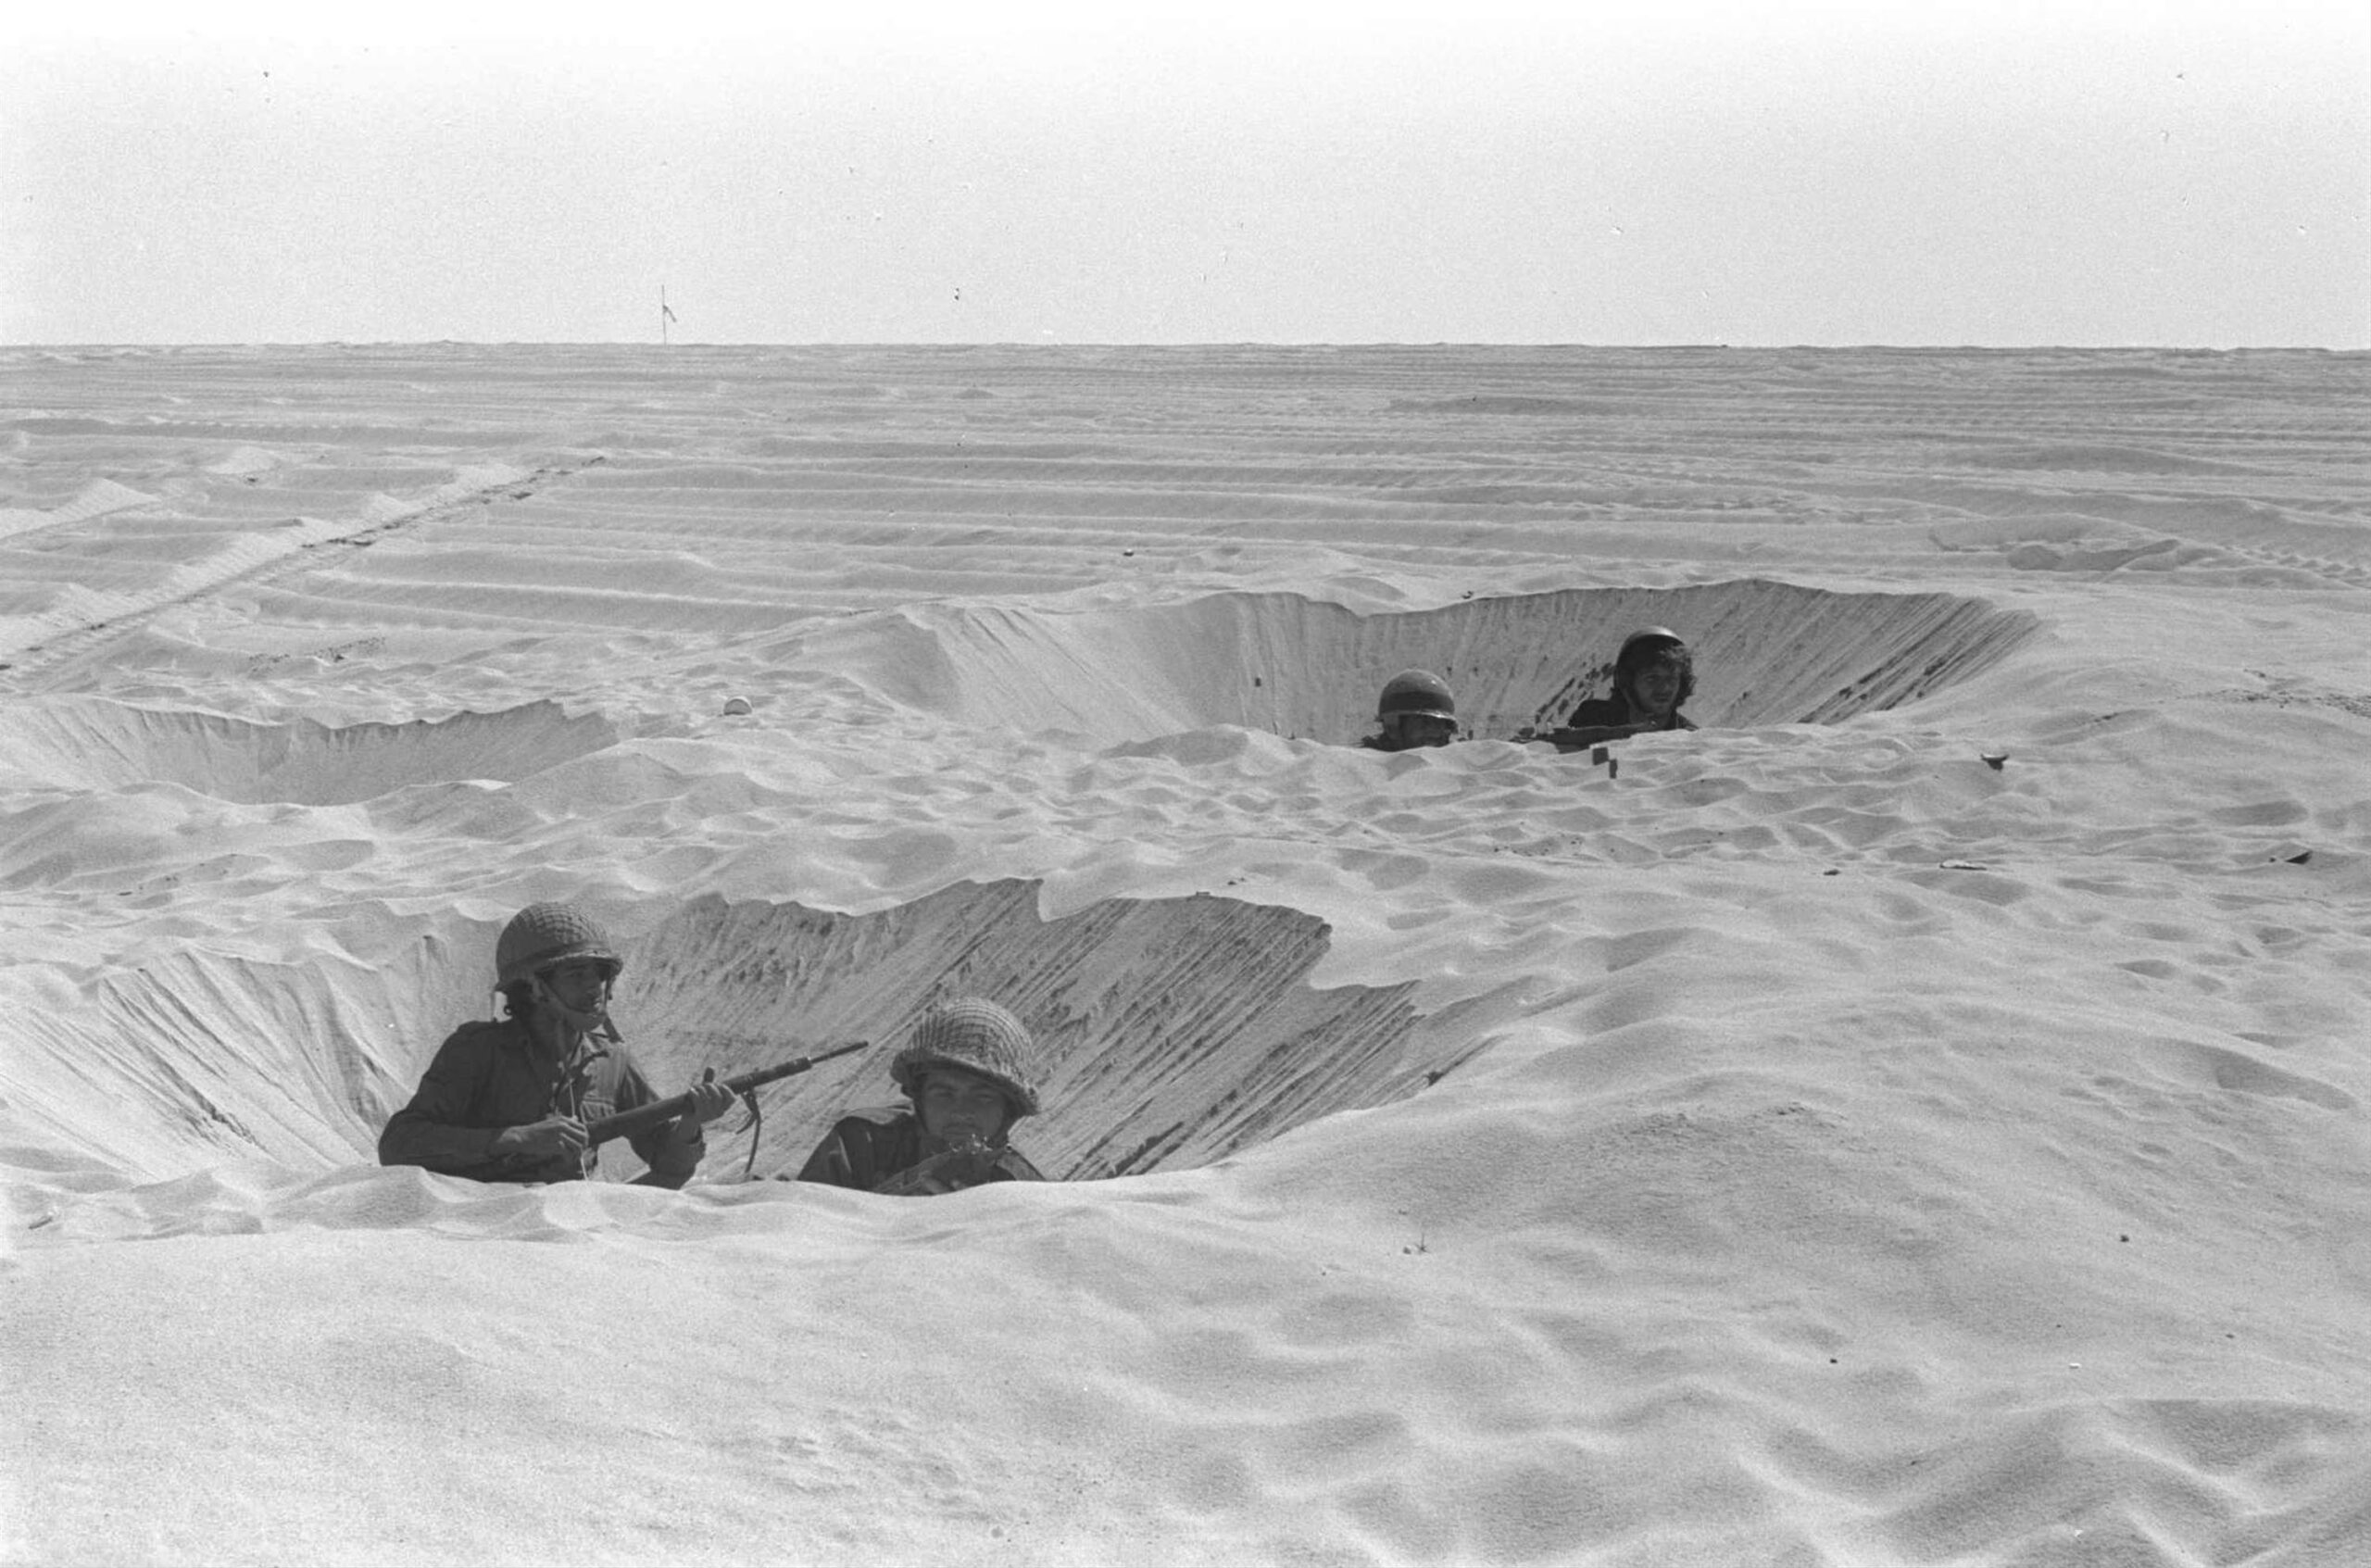 Israeli soldiers in foxholes on October 14, 1973 in the Sinai Desert during the Yom Kippur War. GPO/Getty Images.
